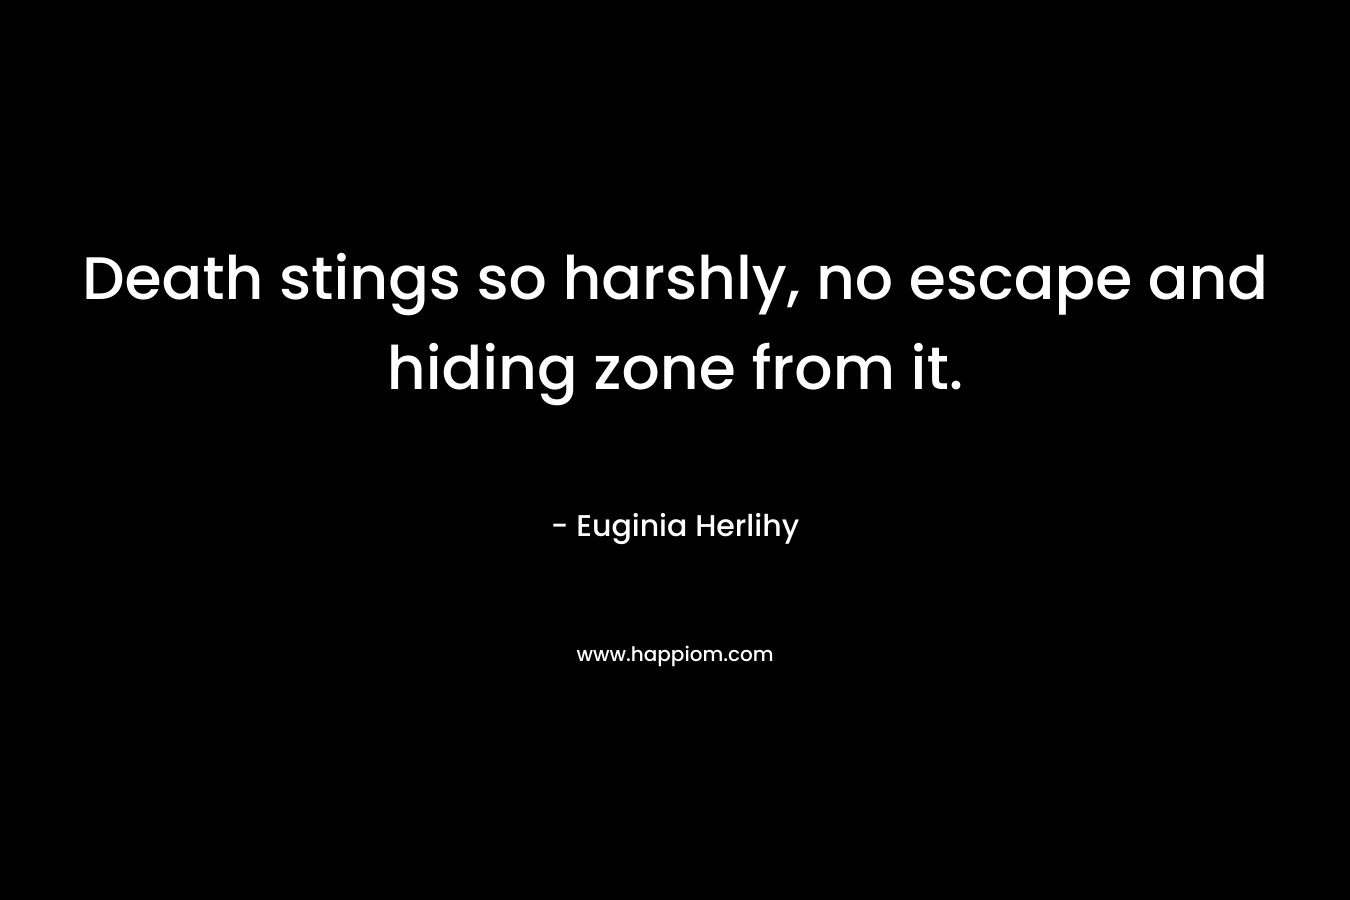 Death stings so harshly, no escape and hiding zone from it. – Euginia Herlihy